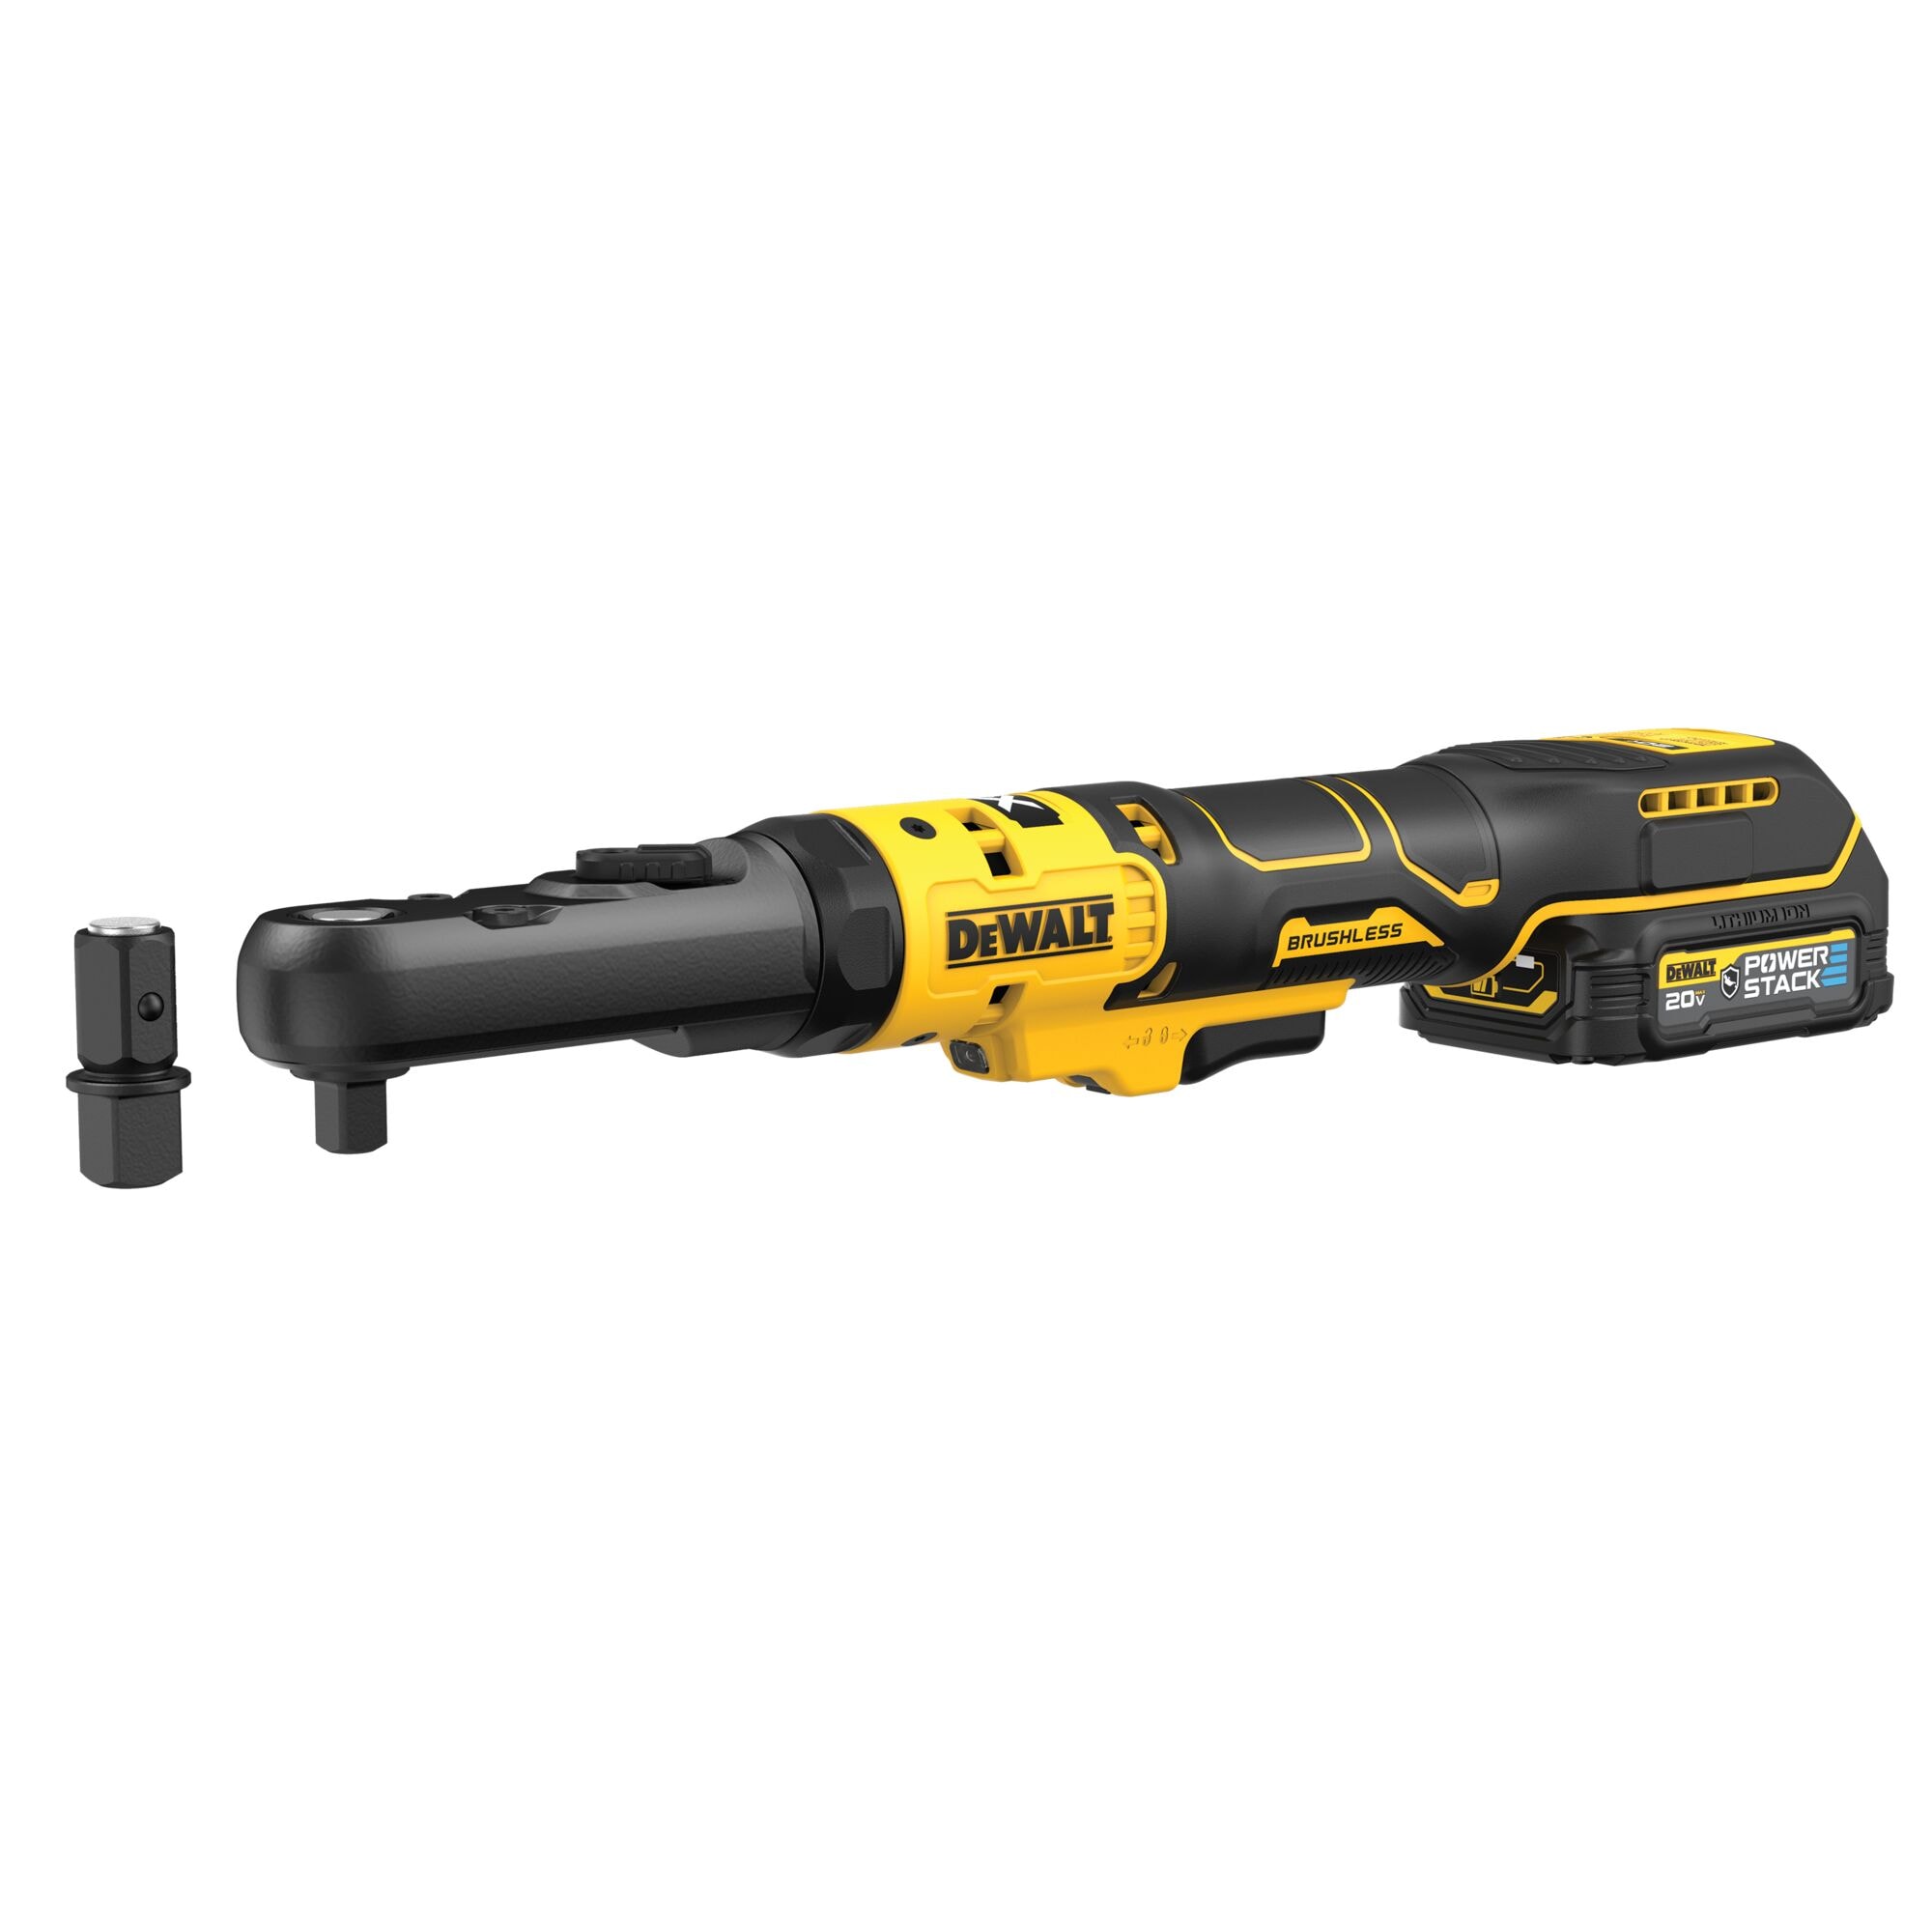 DEWALT 20-volt Max Variable Speed Brushless 3/8-in;1/2-in Drive